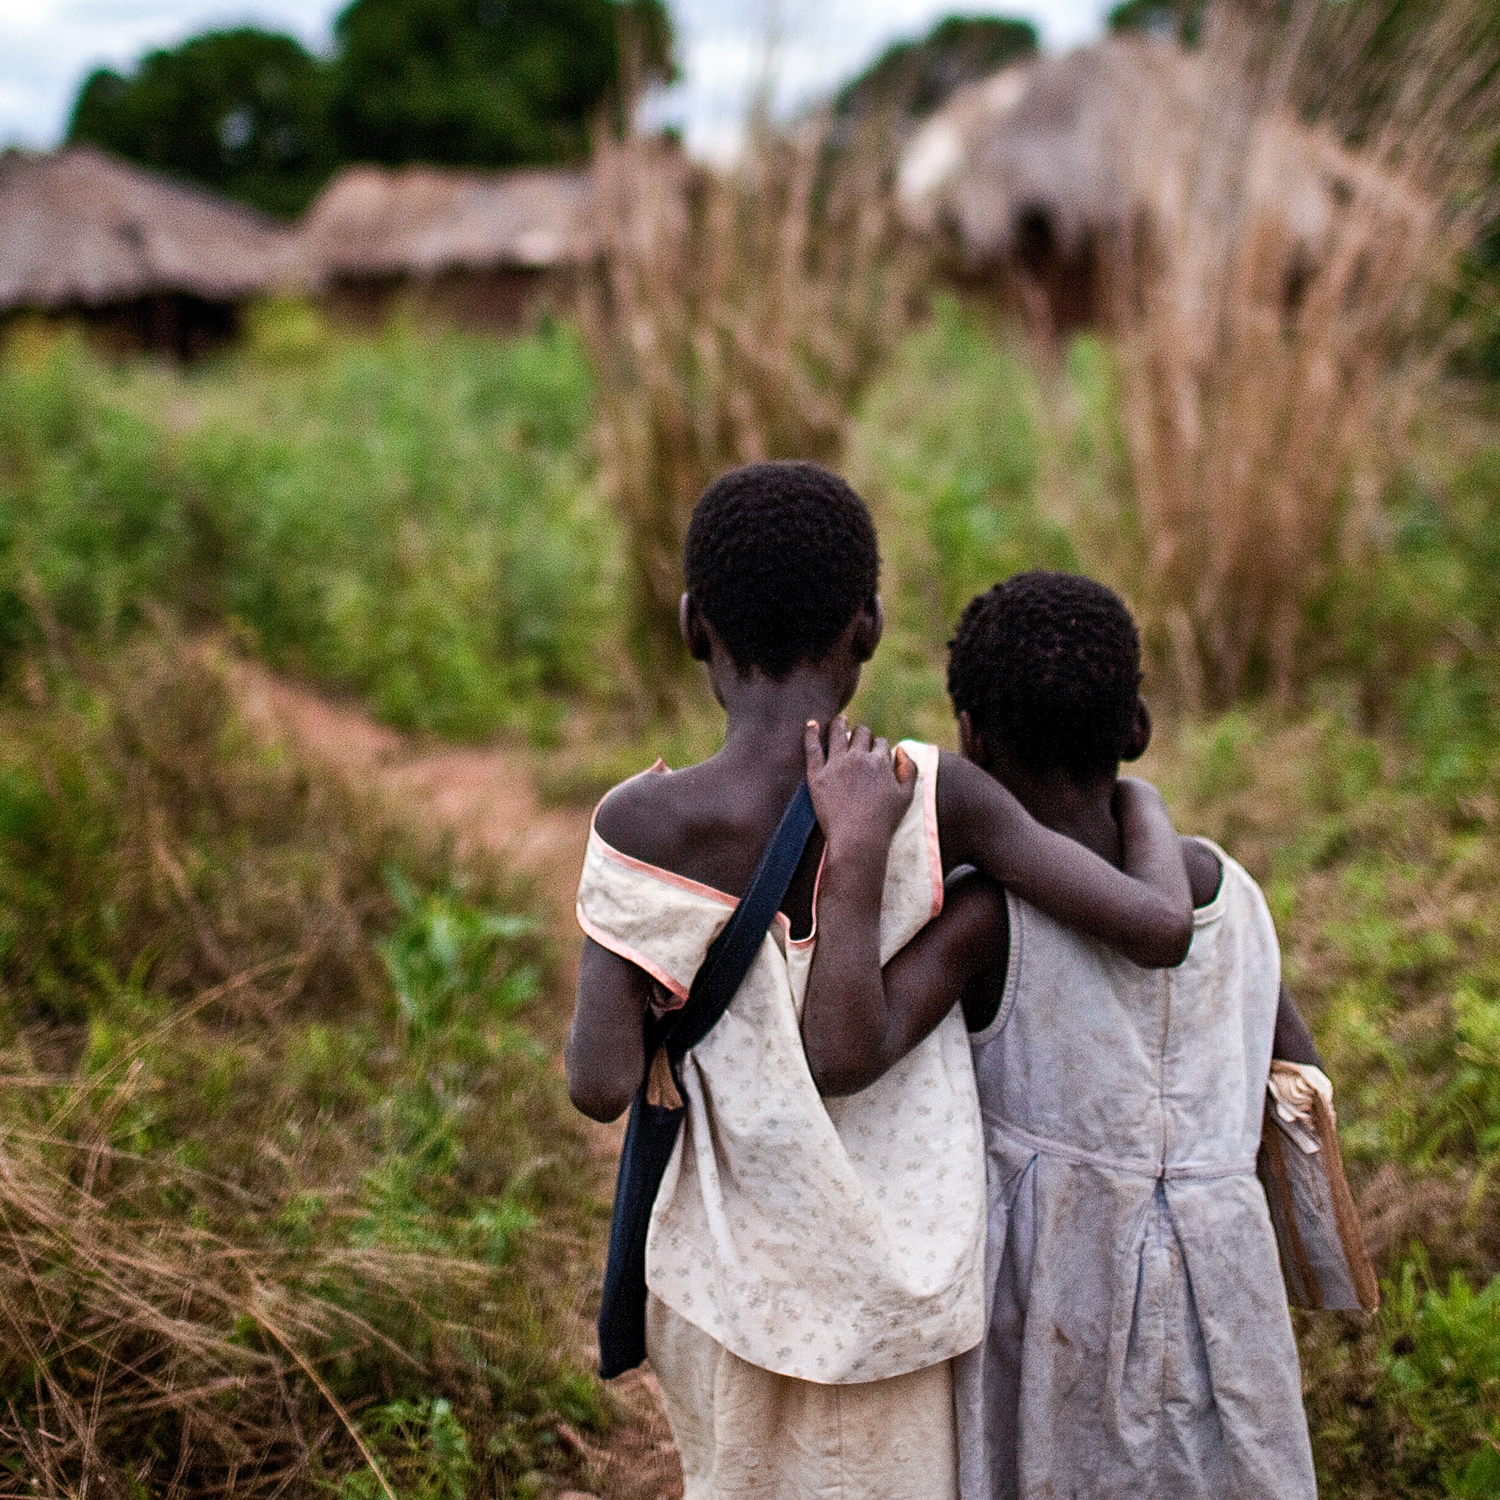 Two young sisters who lost their mother to HIV and AIDS walk home arm-in-arm after school. Photo credit: Save the Children, 2010. 